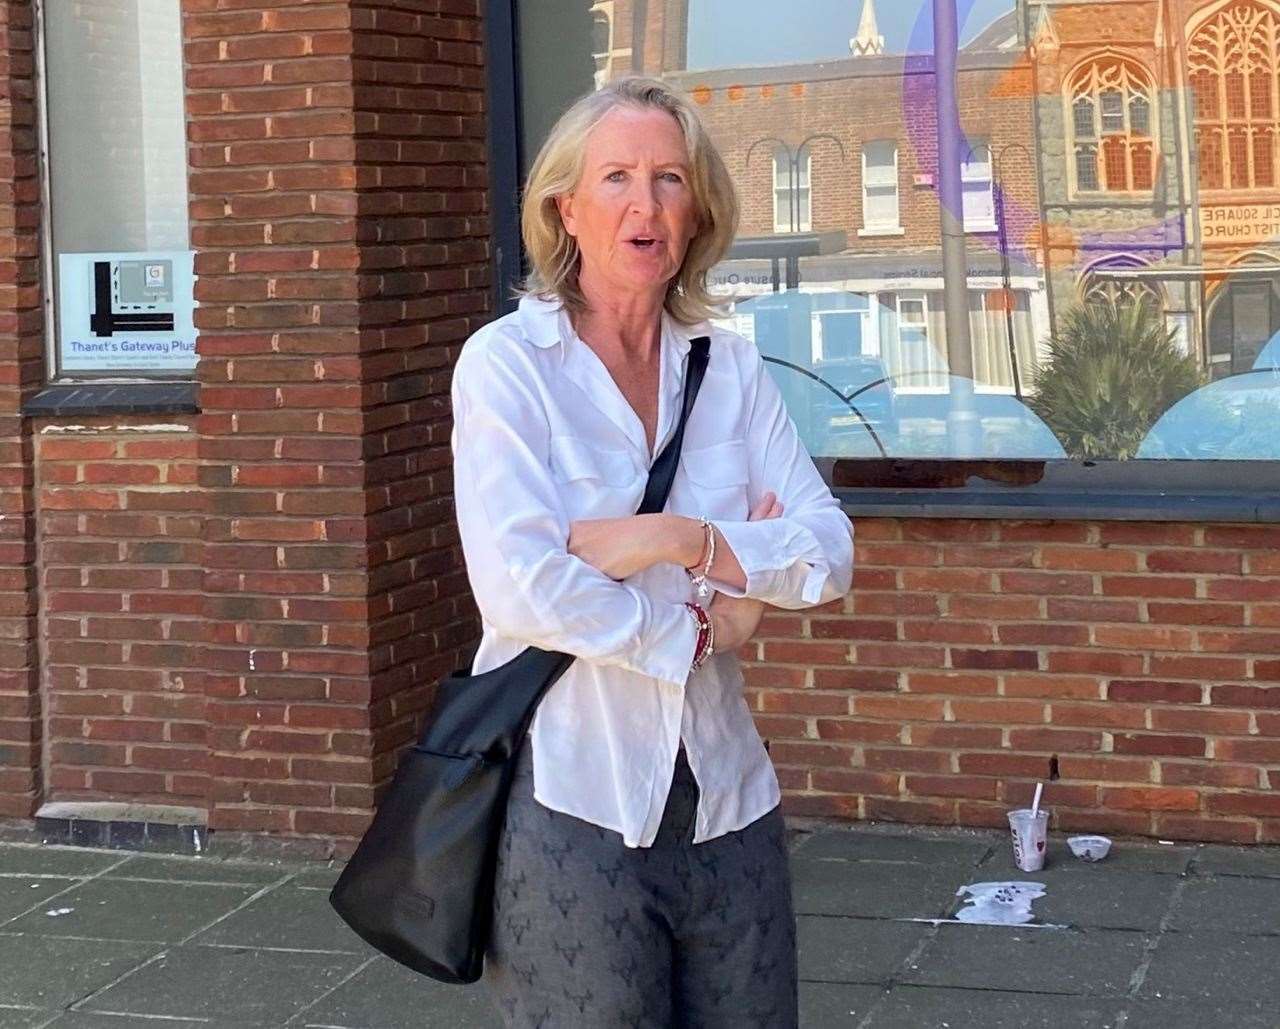 Bear’s owner, Lindz Fairbrass of Whitstable, was tried and convicted at Margate Magistrates Court